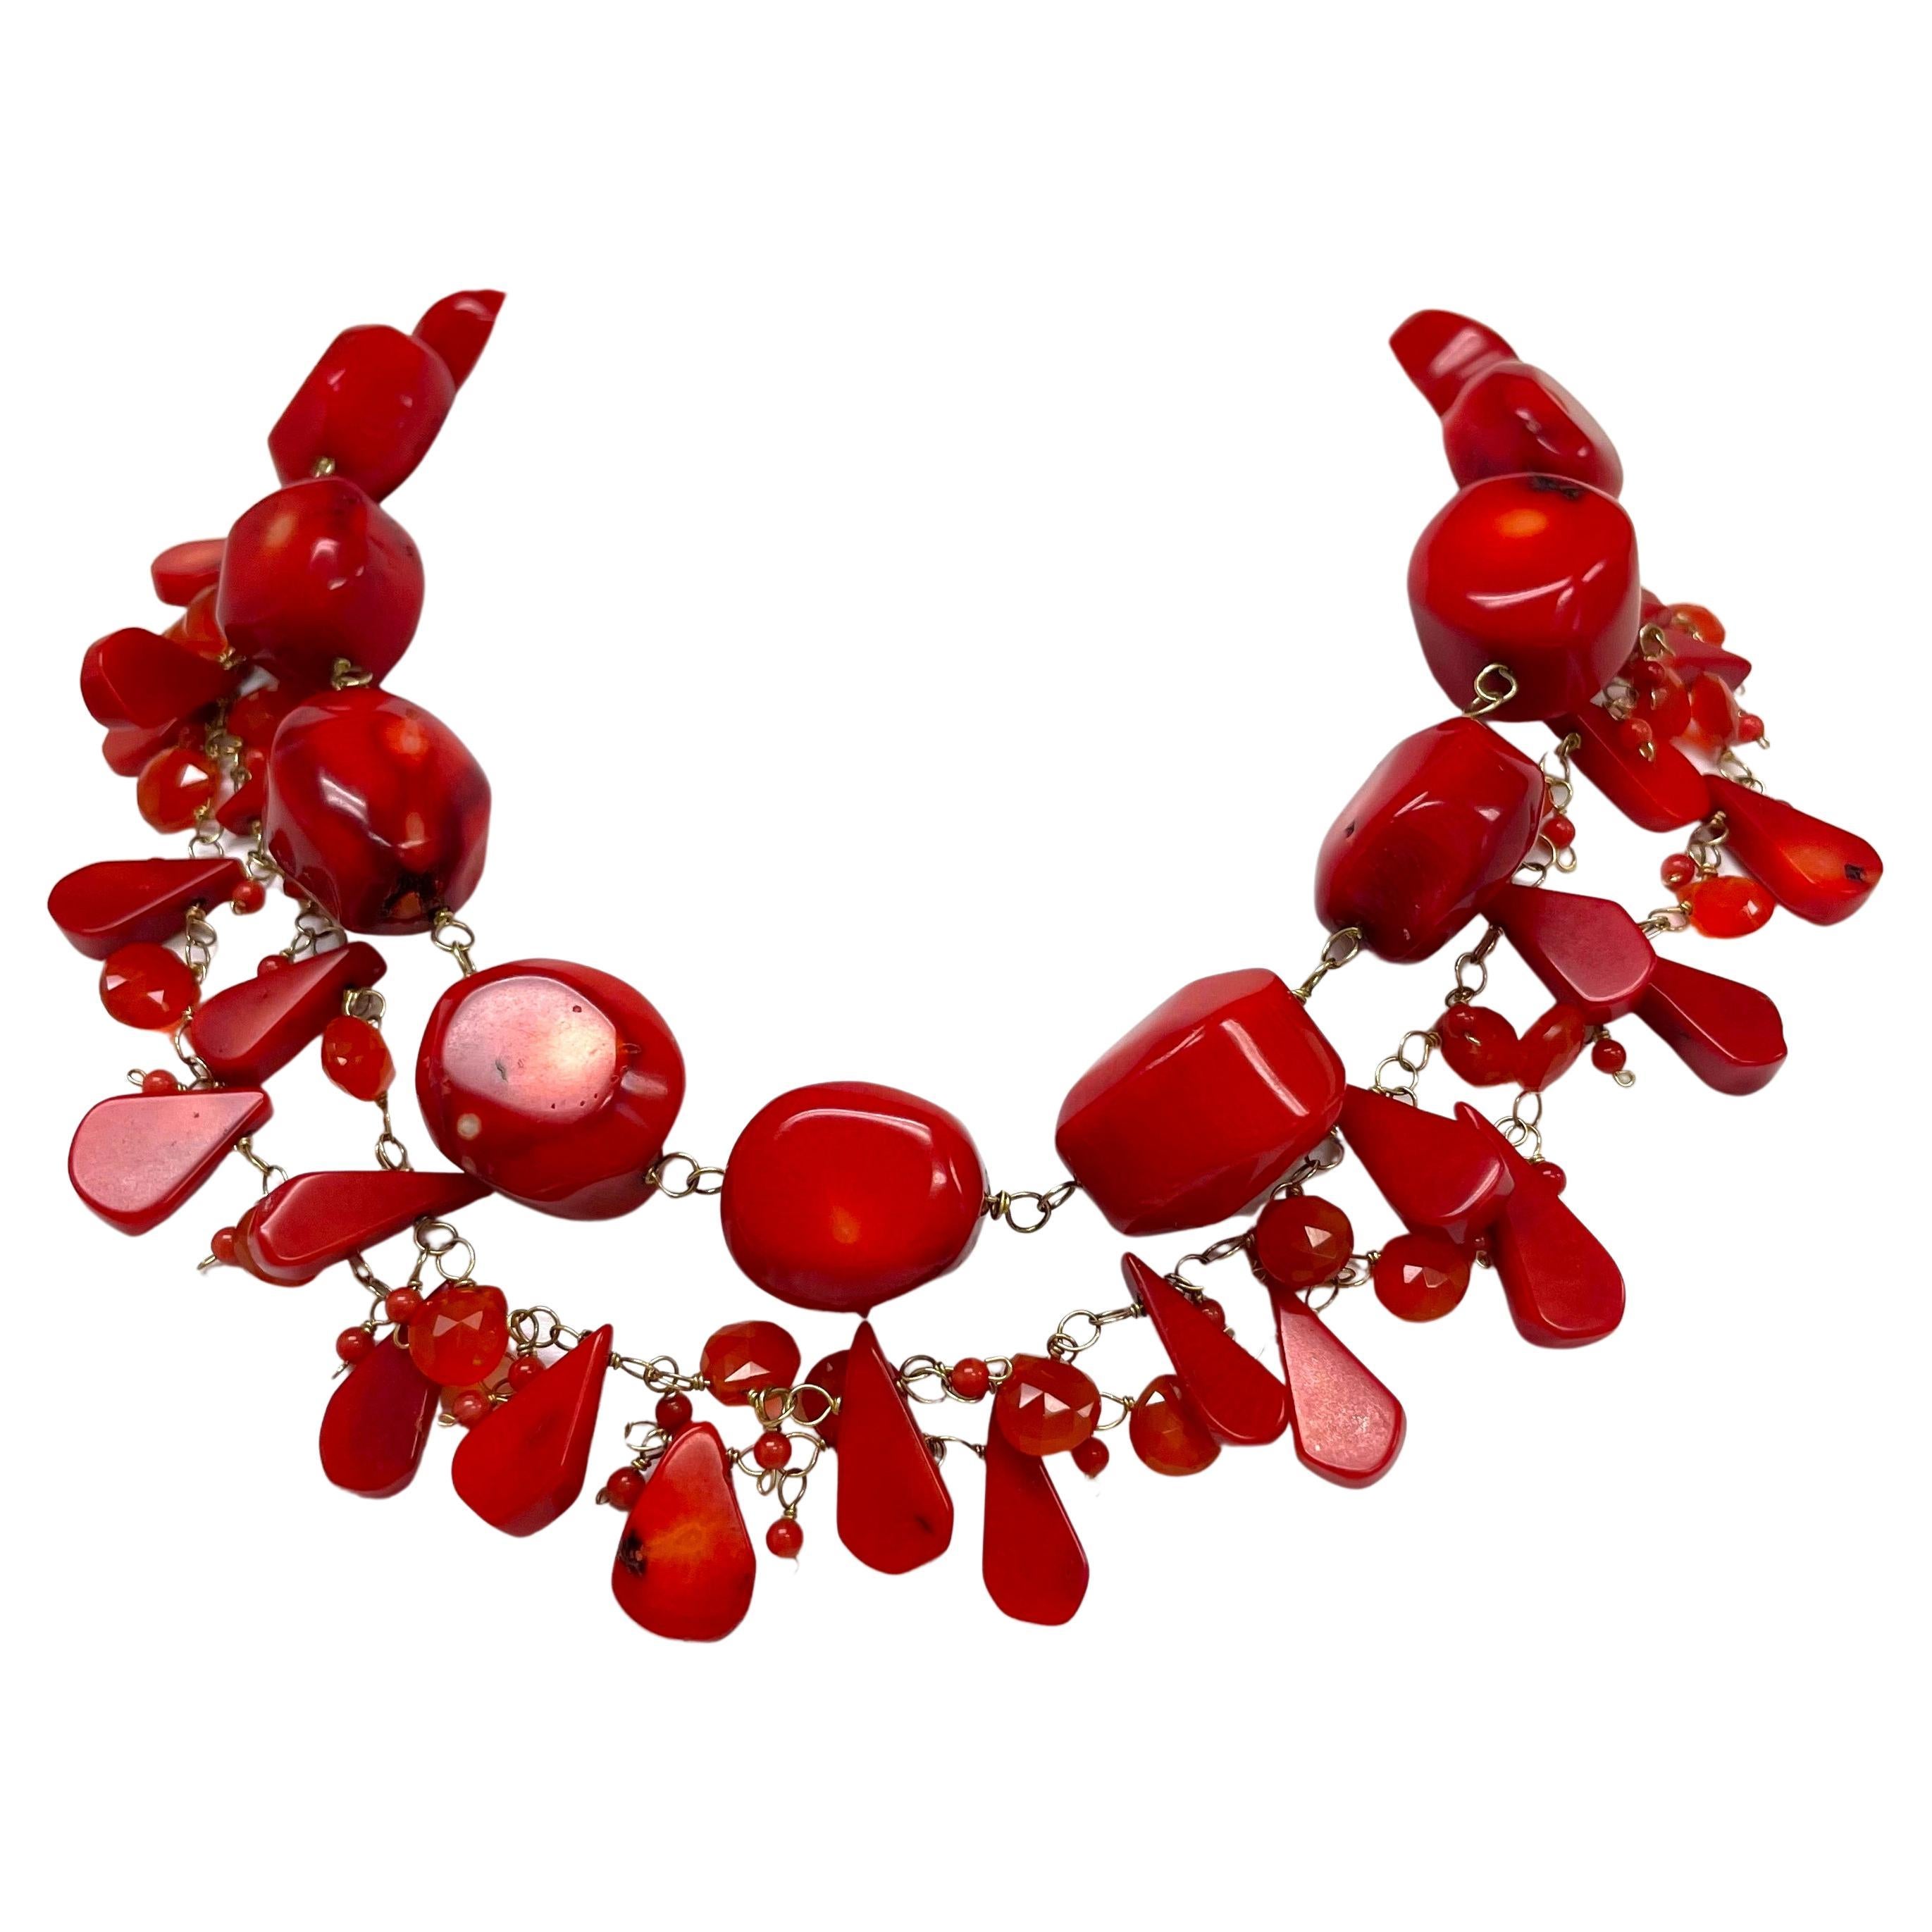 Description
This bold, yet elegant vibrant three strand statement necklace expresses your own personal flair. The uncommon mix of Coral and Carnelian with the contrast of large and delicate hand wire-wrapped stones is what makes this necklace very